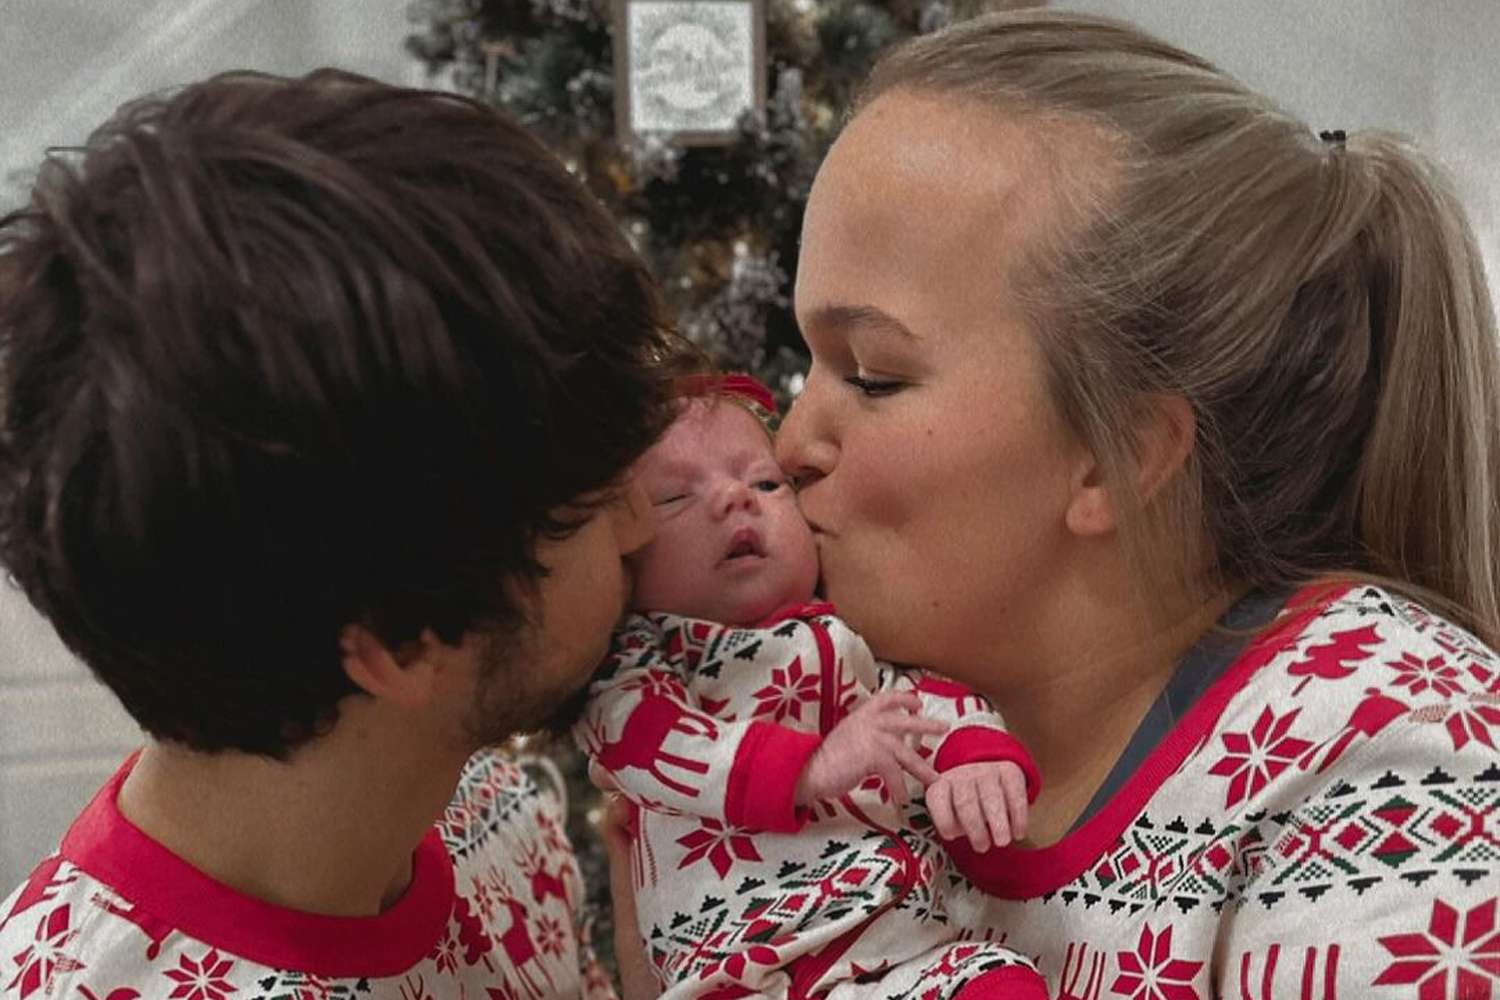 “7 Little Johnstons'” Liz Wants to 'Convince' Boyfriend to Have Another Baby: 'Try for a Little Person' (Exclusive)